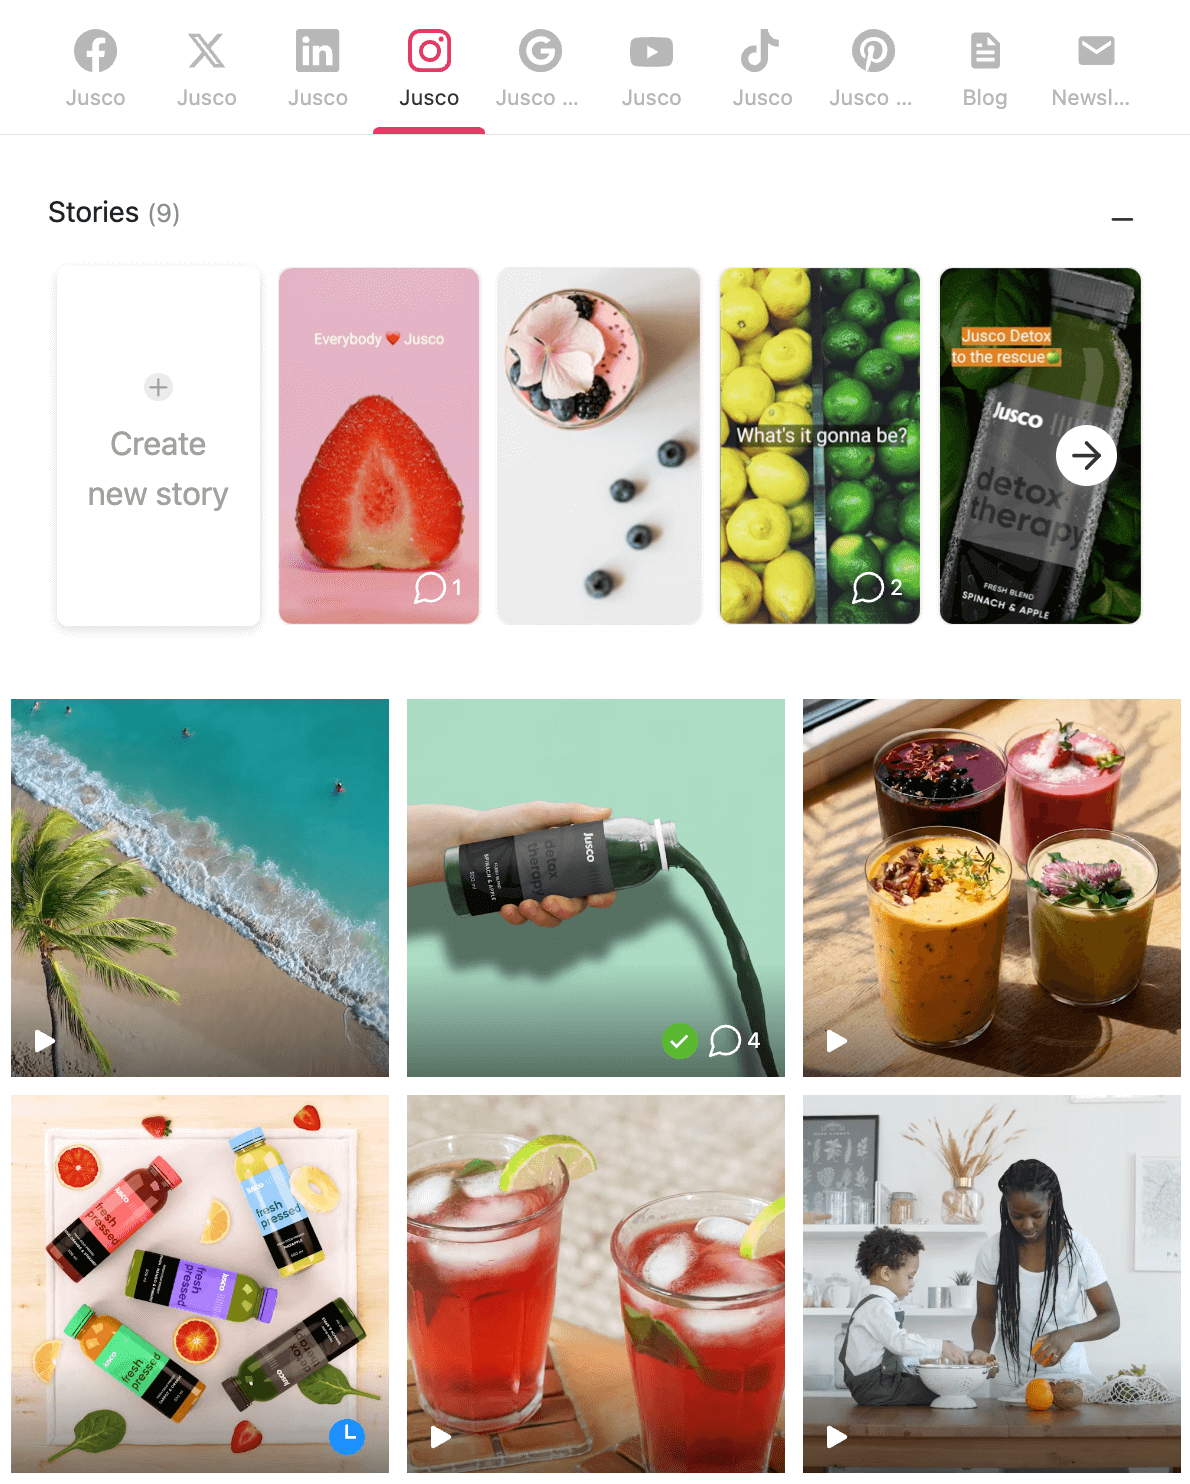 Jusco Instagram profile showing stories and posts, including images of smoothies, juices, tropical scenes, and people preparing drinks.